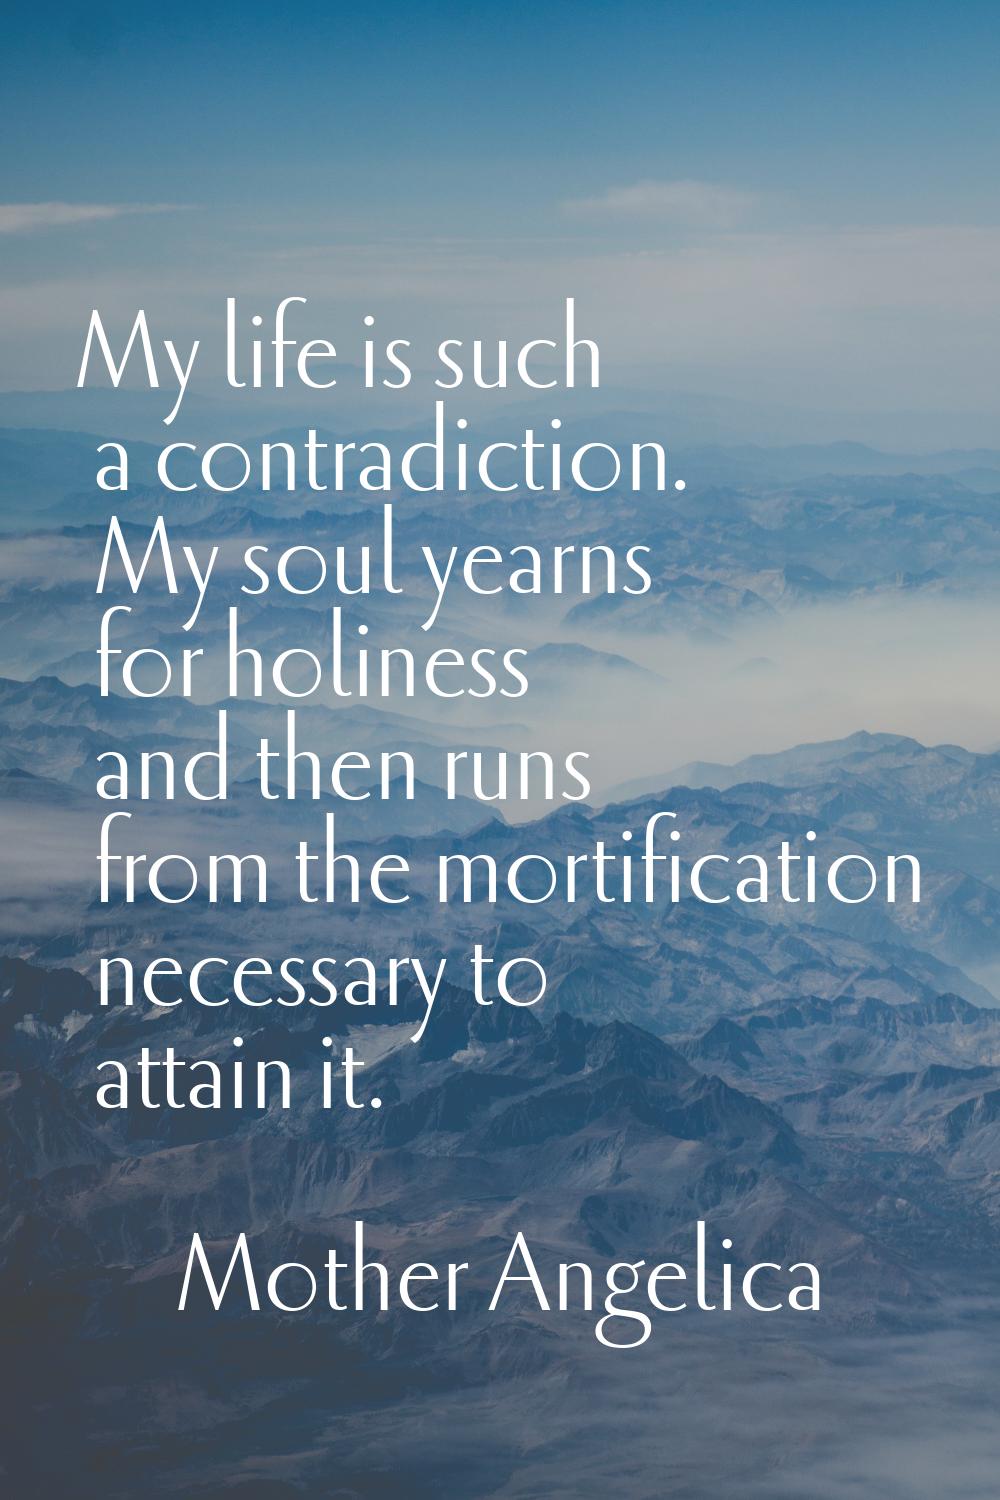 My life is such a contradiction. My soul yearns for holiness and then runs from the mortification n